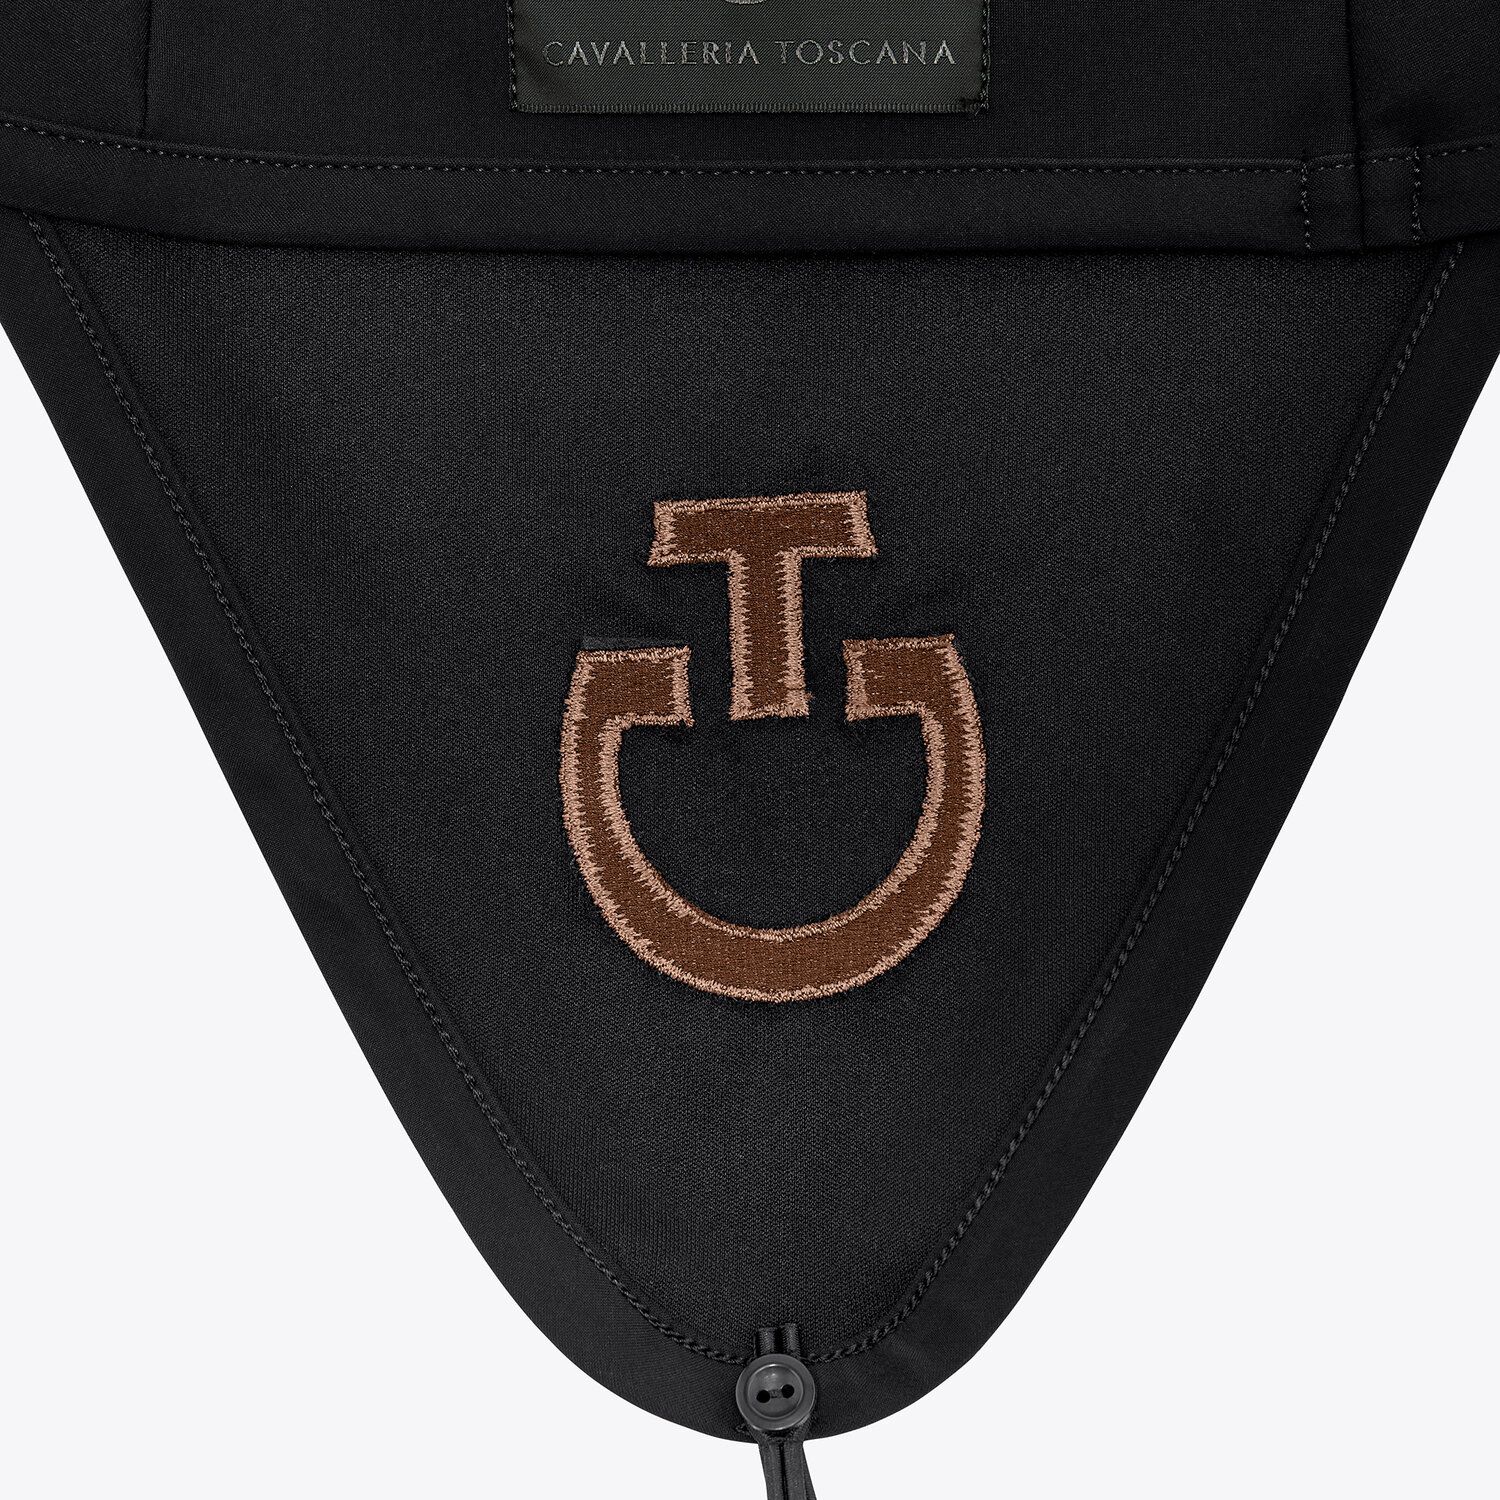 Cavalleria Toscana Lightweight jersey attachable earnet BLACK/TOFFEE BROWN-2